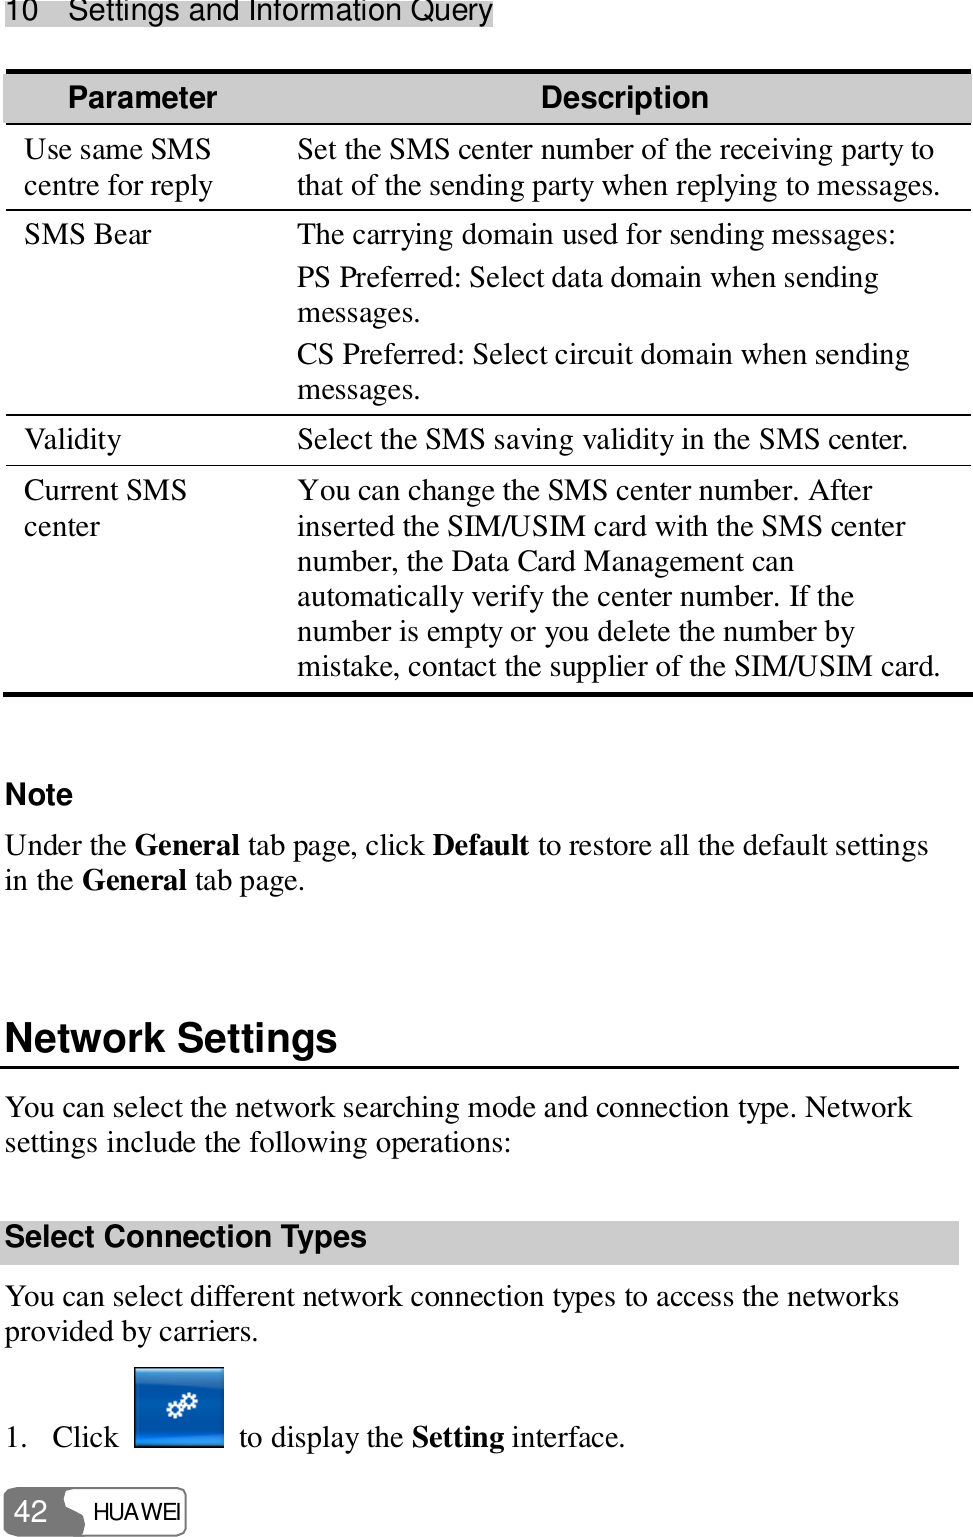 10  Settings and Information Query HUAWEI  42 Parameter  Description Use same SMS centre for reply  Set the SMS center number of the receiving party to that of the sending party when replying to messages. SMS Bear  The carrying domain used for sending messages: PS Preferred: Select data domain when sending messages. CS Preferred: Select circuit domain when sending messages. Validity  Select the SMS saving validity in the SMS center. Current SMS center                                      You can change the SMS center number. After inserted the SIM/USIM card with the SMS center number, the Data Card Management can automatically verify the center number. If the number is empty or you delete the number by mistake, contact the supplier of the SIM/USIM card.  Note Under the General tab page, click Default to restore all the default settings in the General tab page.  Network Settings You can select the network searching mode and connection type. Network settings include the following operations: Select Connection Types You can select different network connection types to access the networks provided by carriers. 1. Click   to display the Setting interface. 